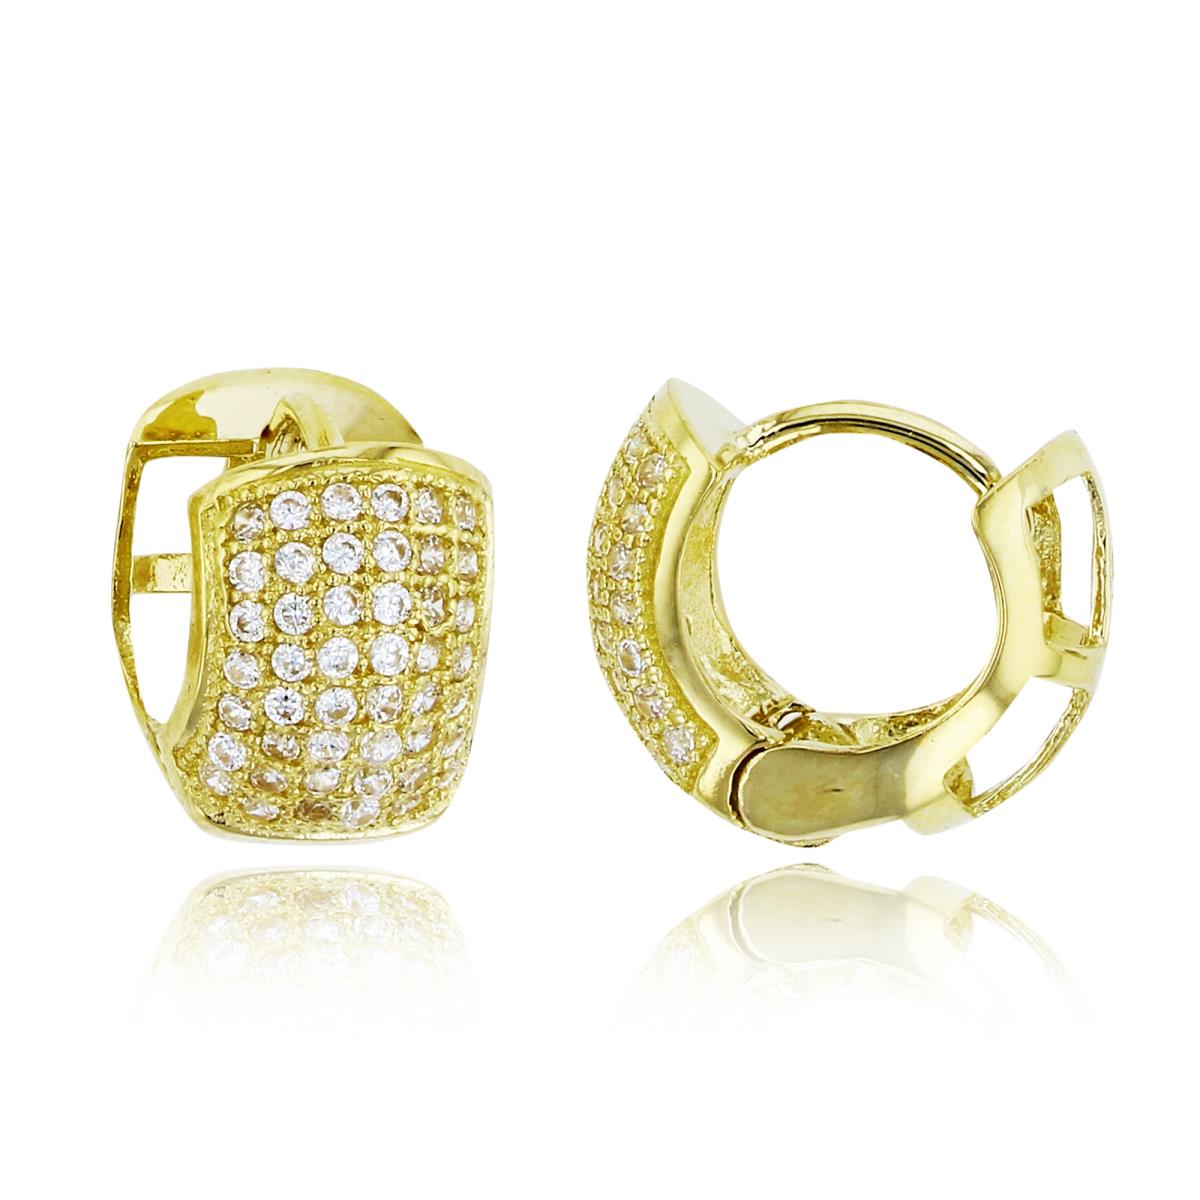 14K Yellow Gold 10x7mm Micropave Puffy Huggie Earring